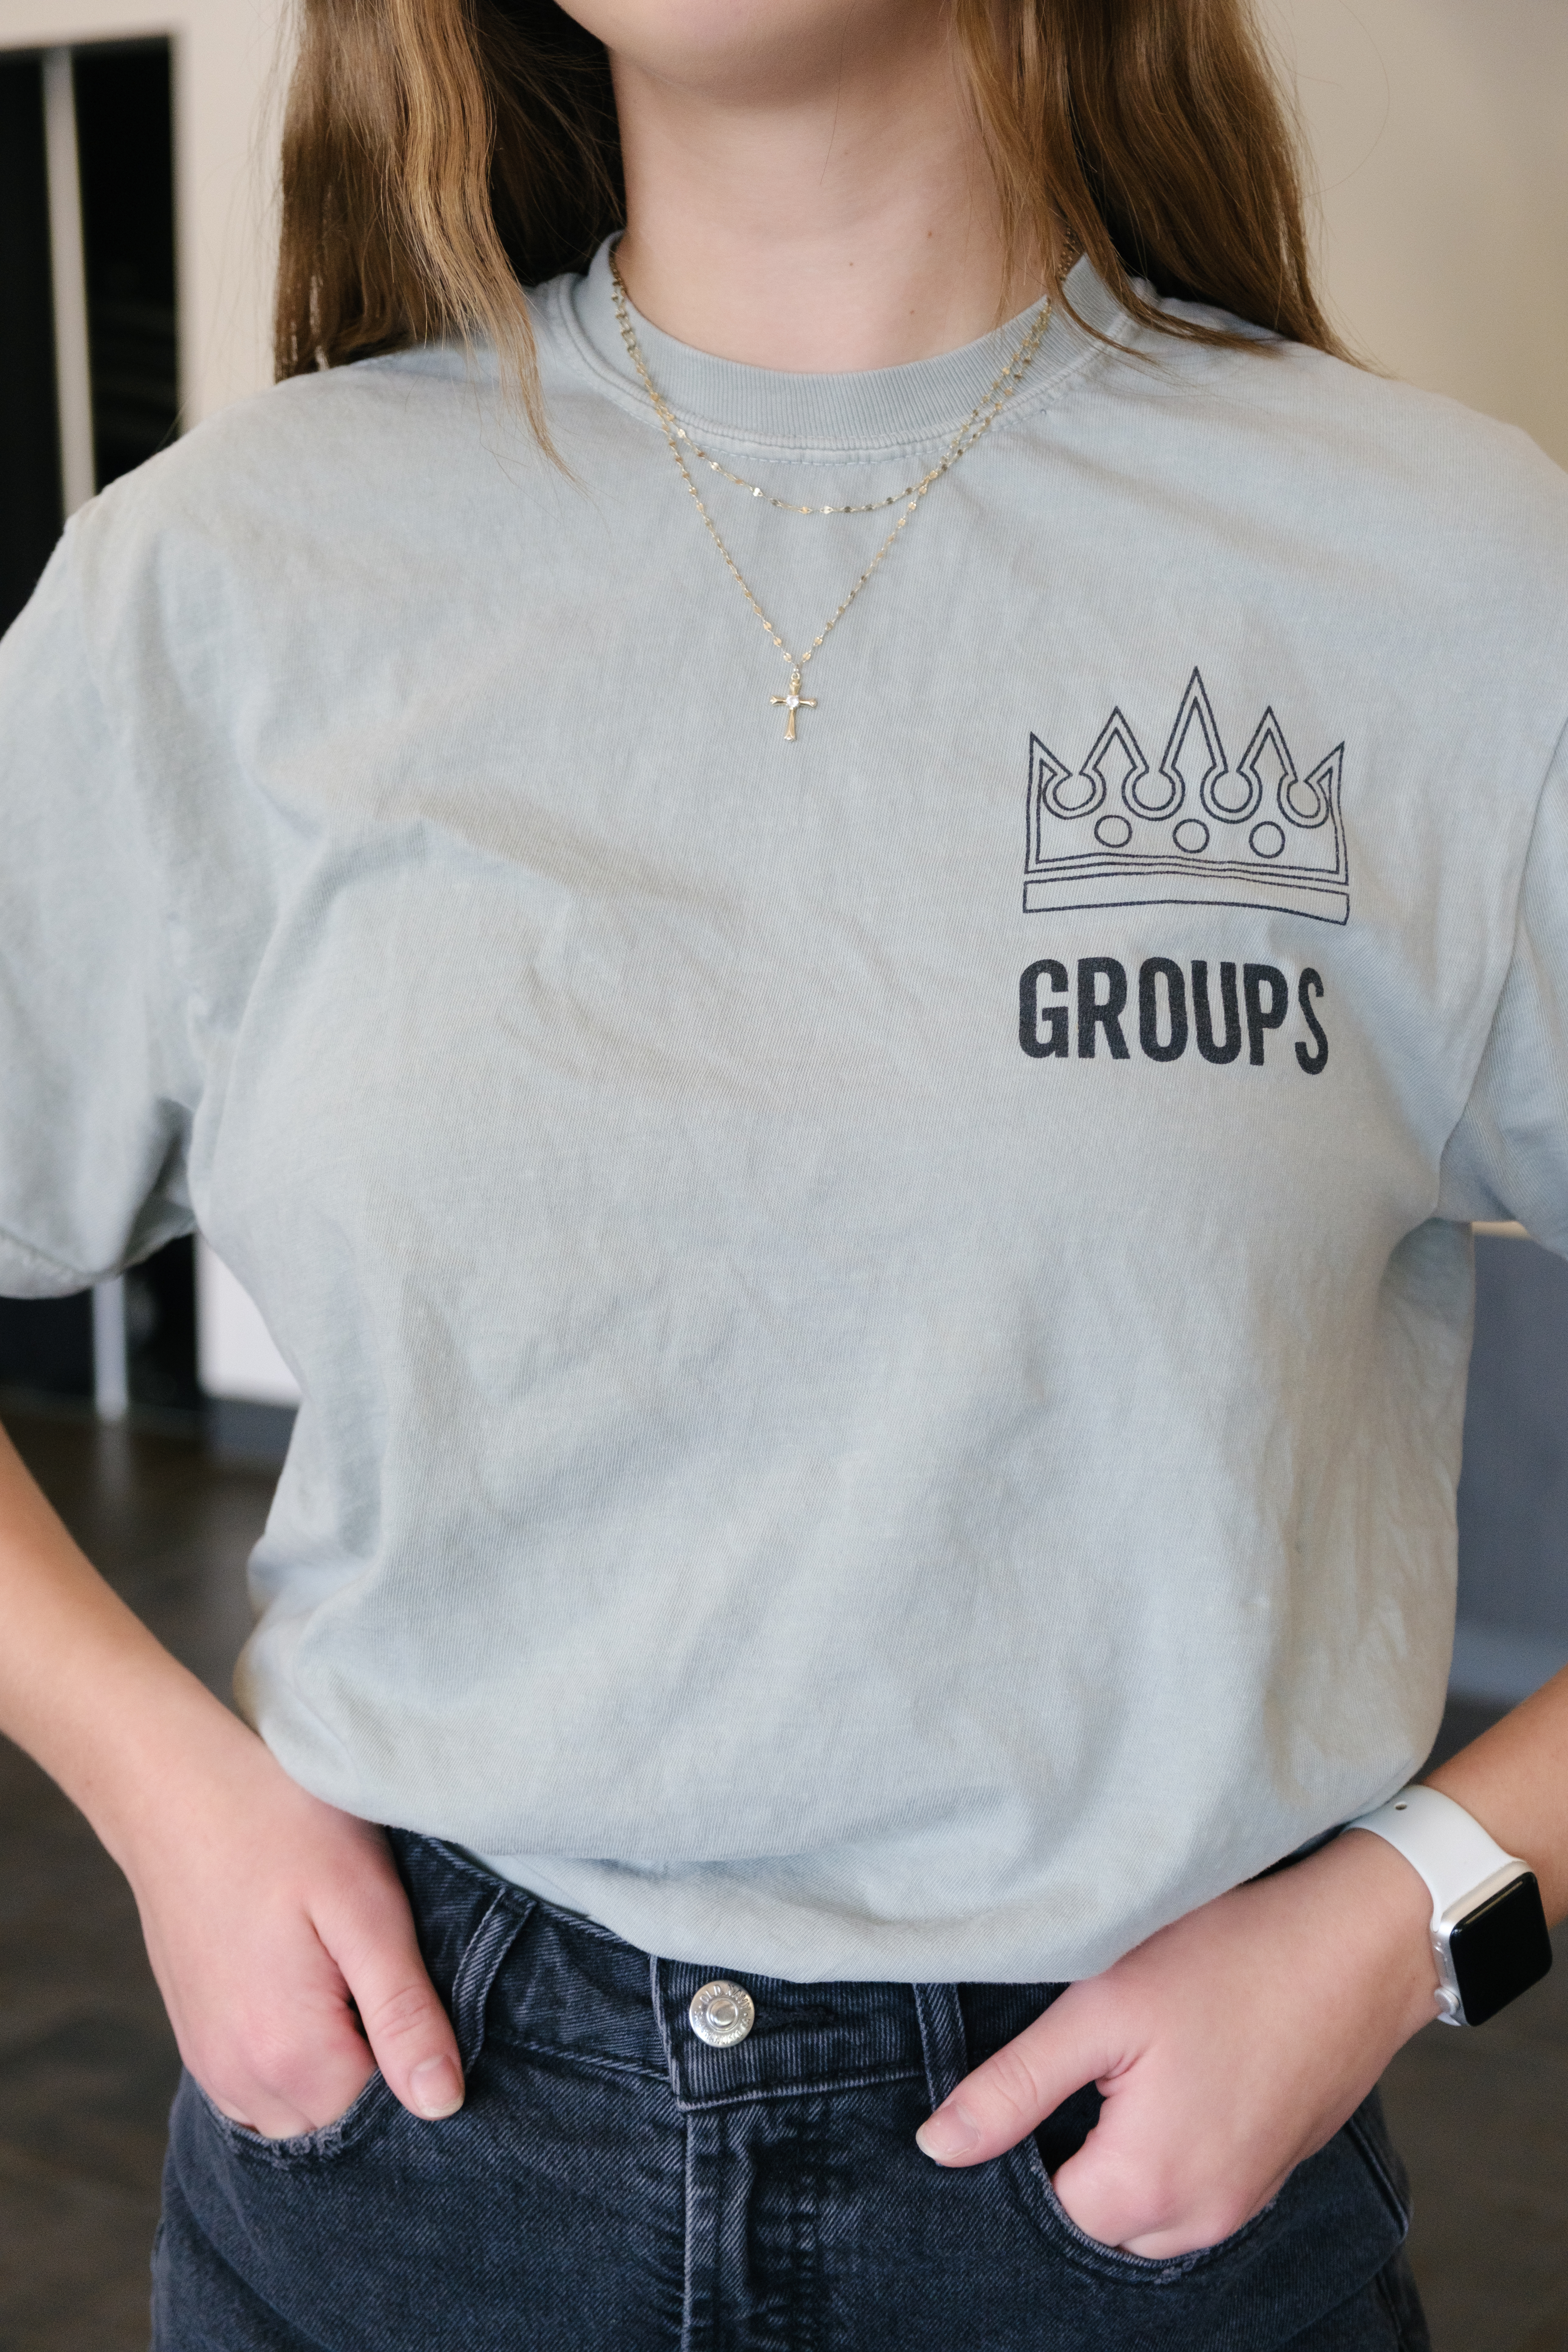 Image of the Groups t-shirt.